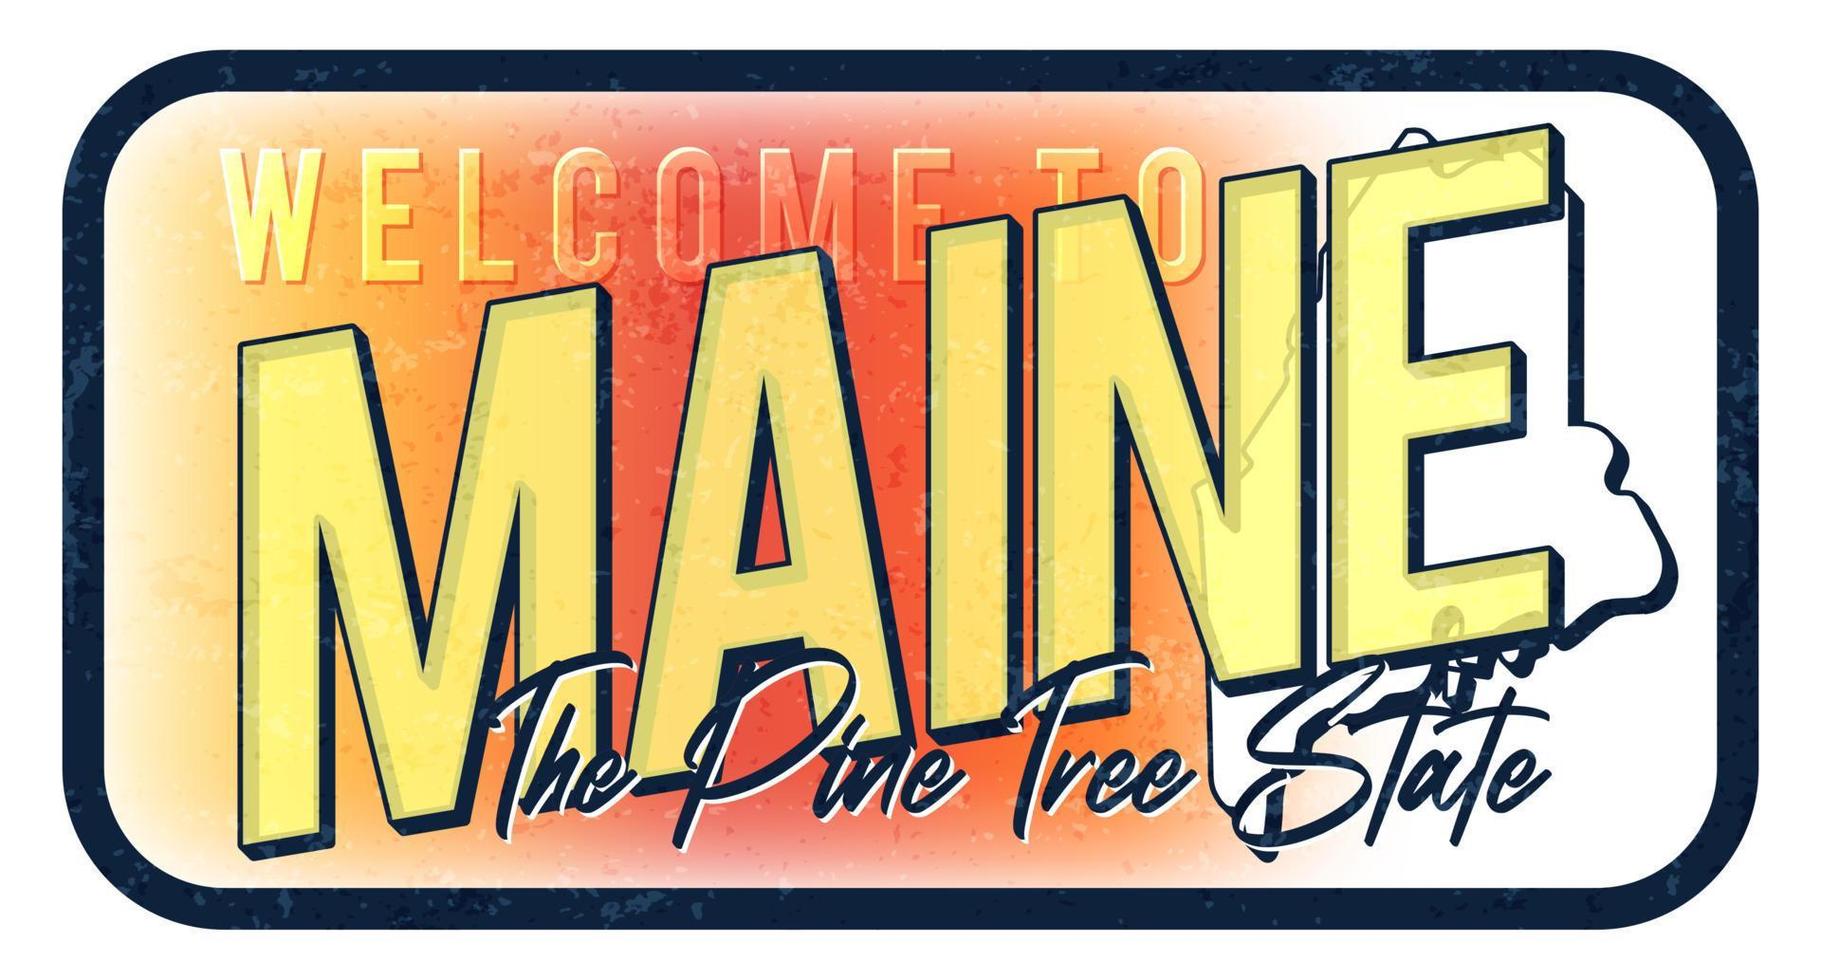 Welcome to maine vintage rusty metal sign vector illustration. Vector state map in grunge style with Typography hand drawn lettering